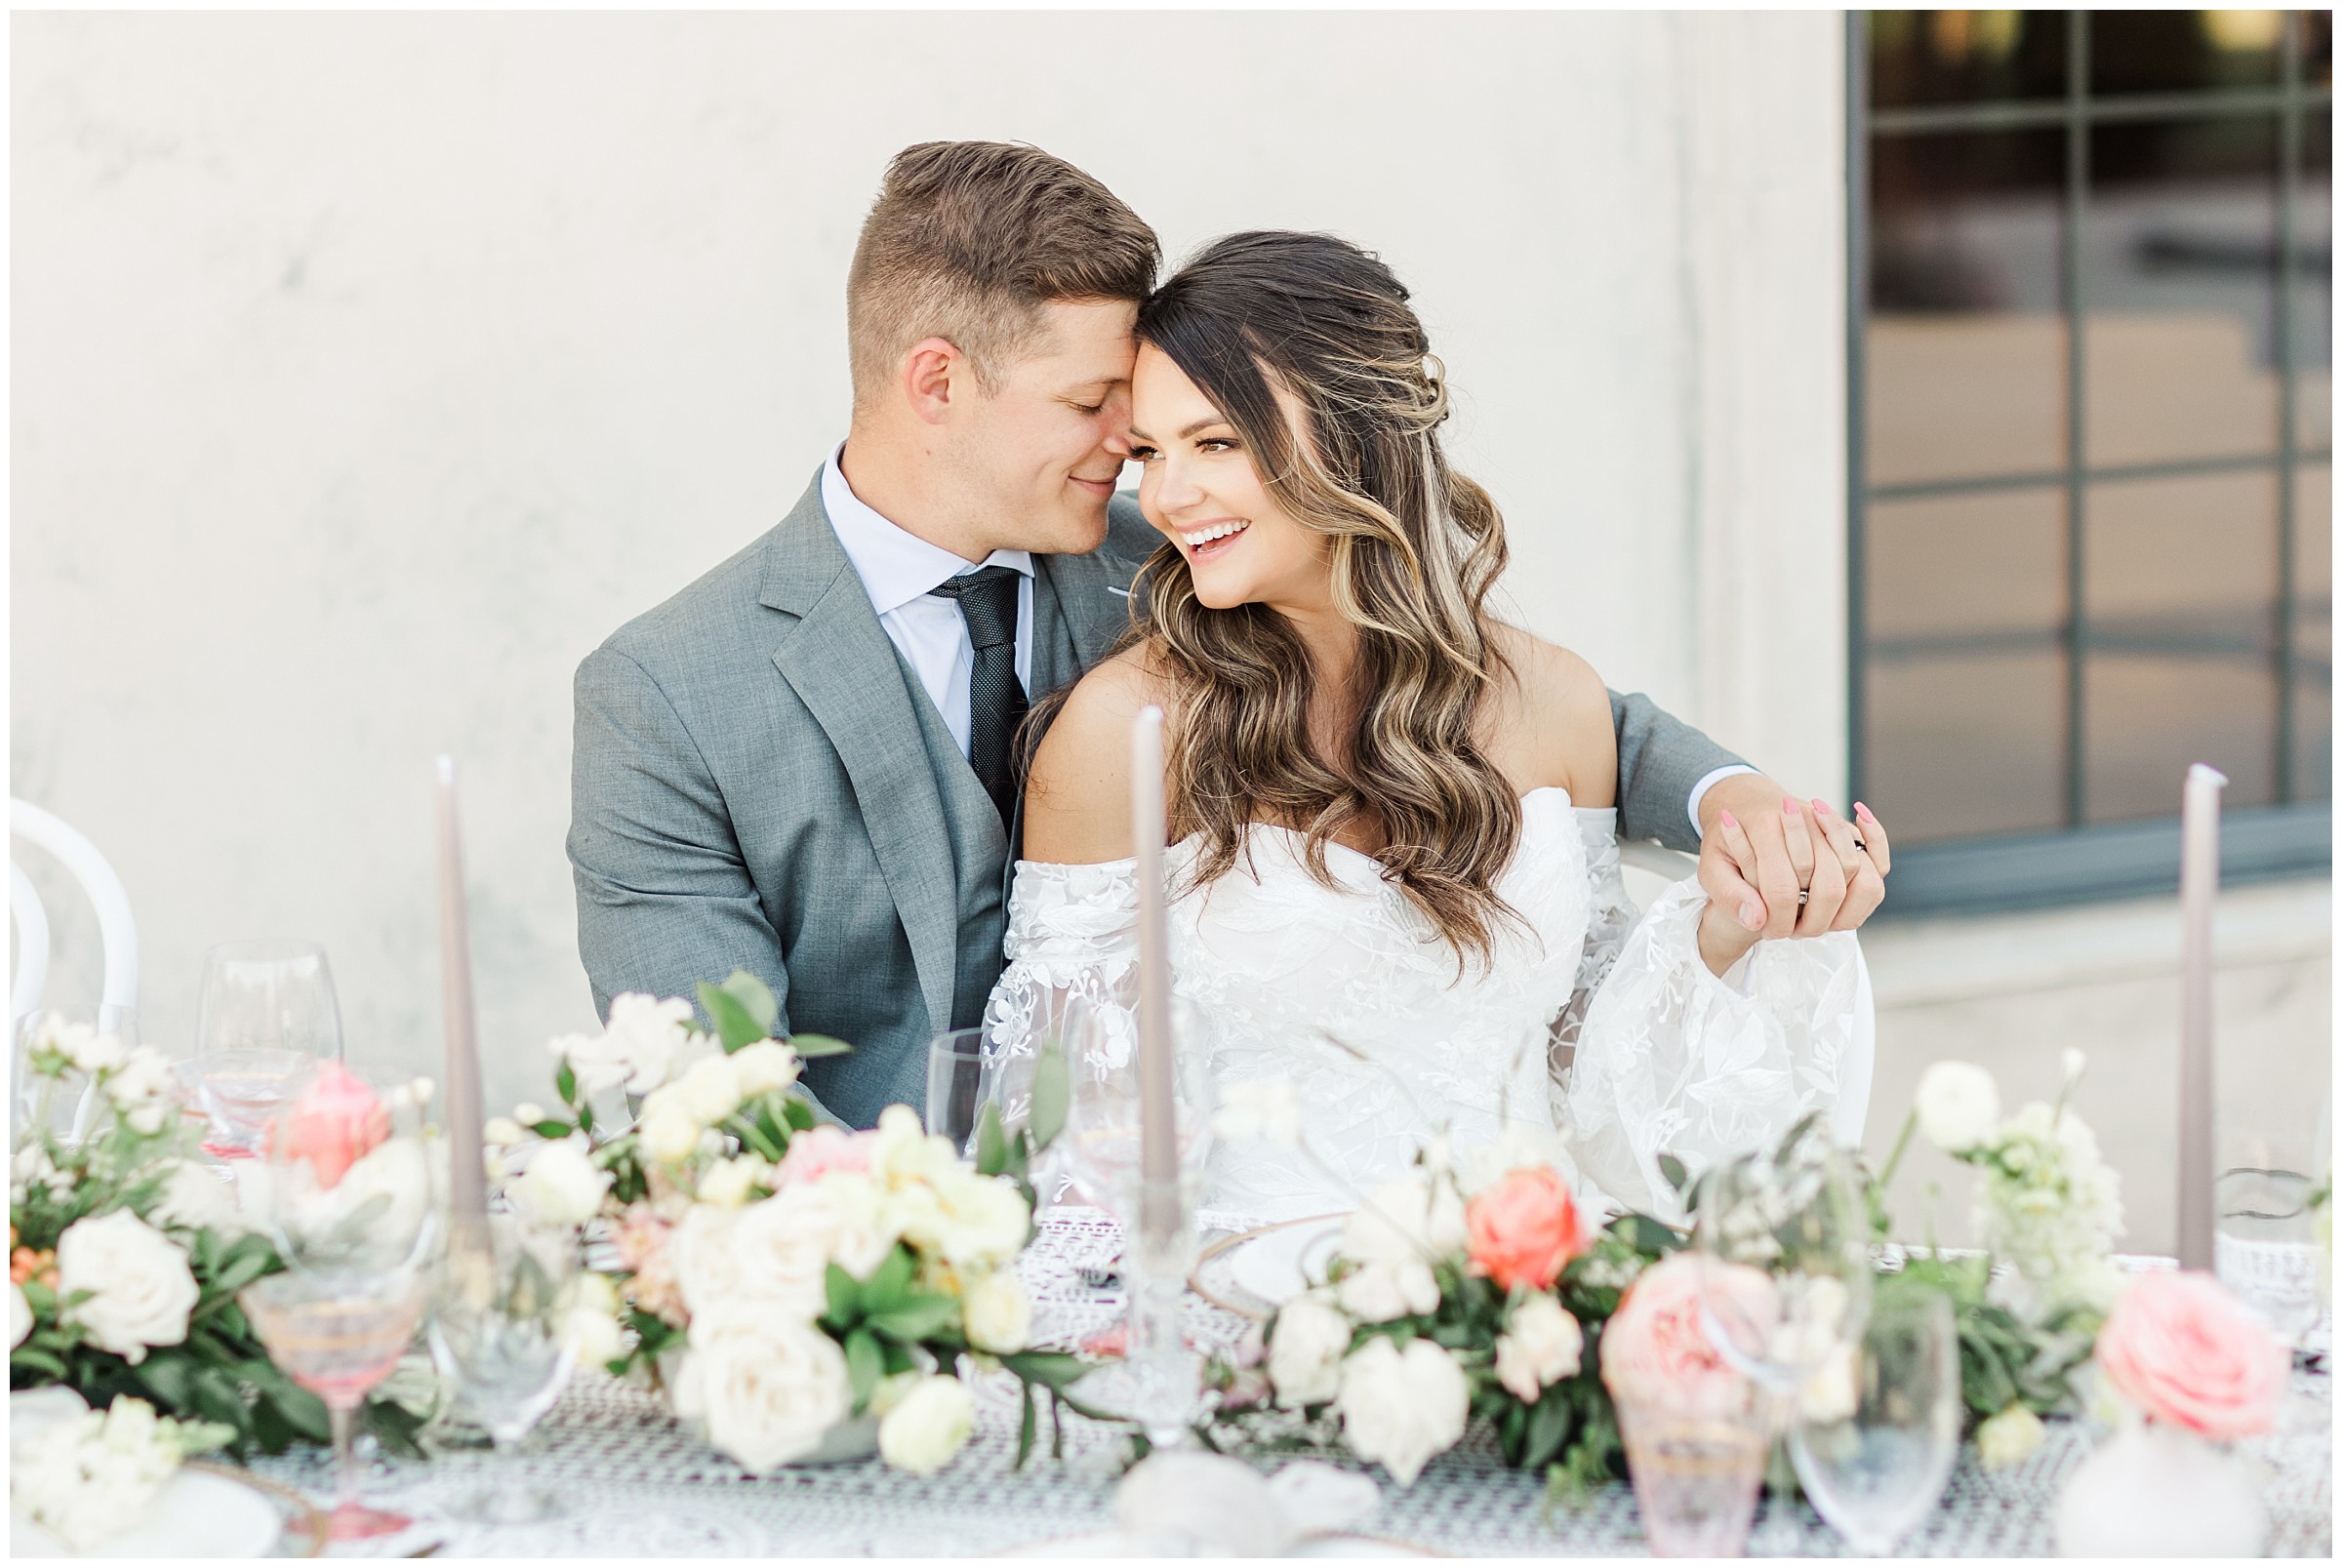 Bride and groom sitting together laughing surrounded by blush and yellow florals